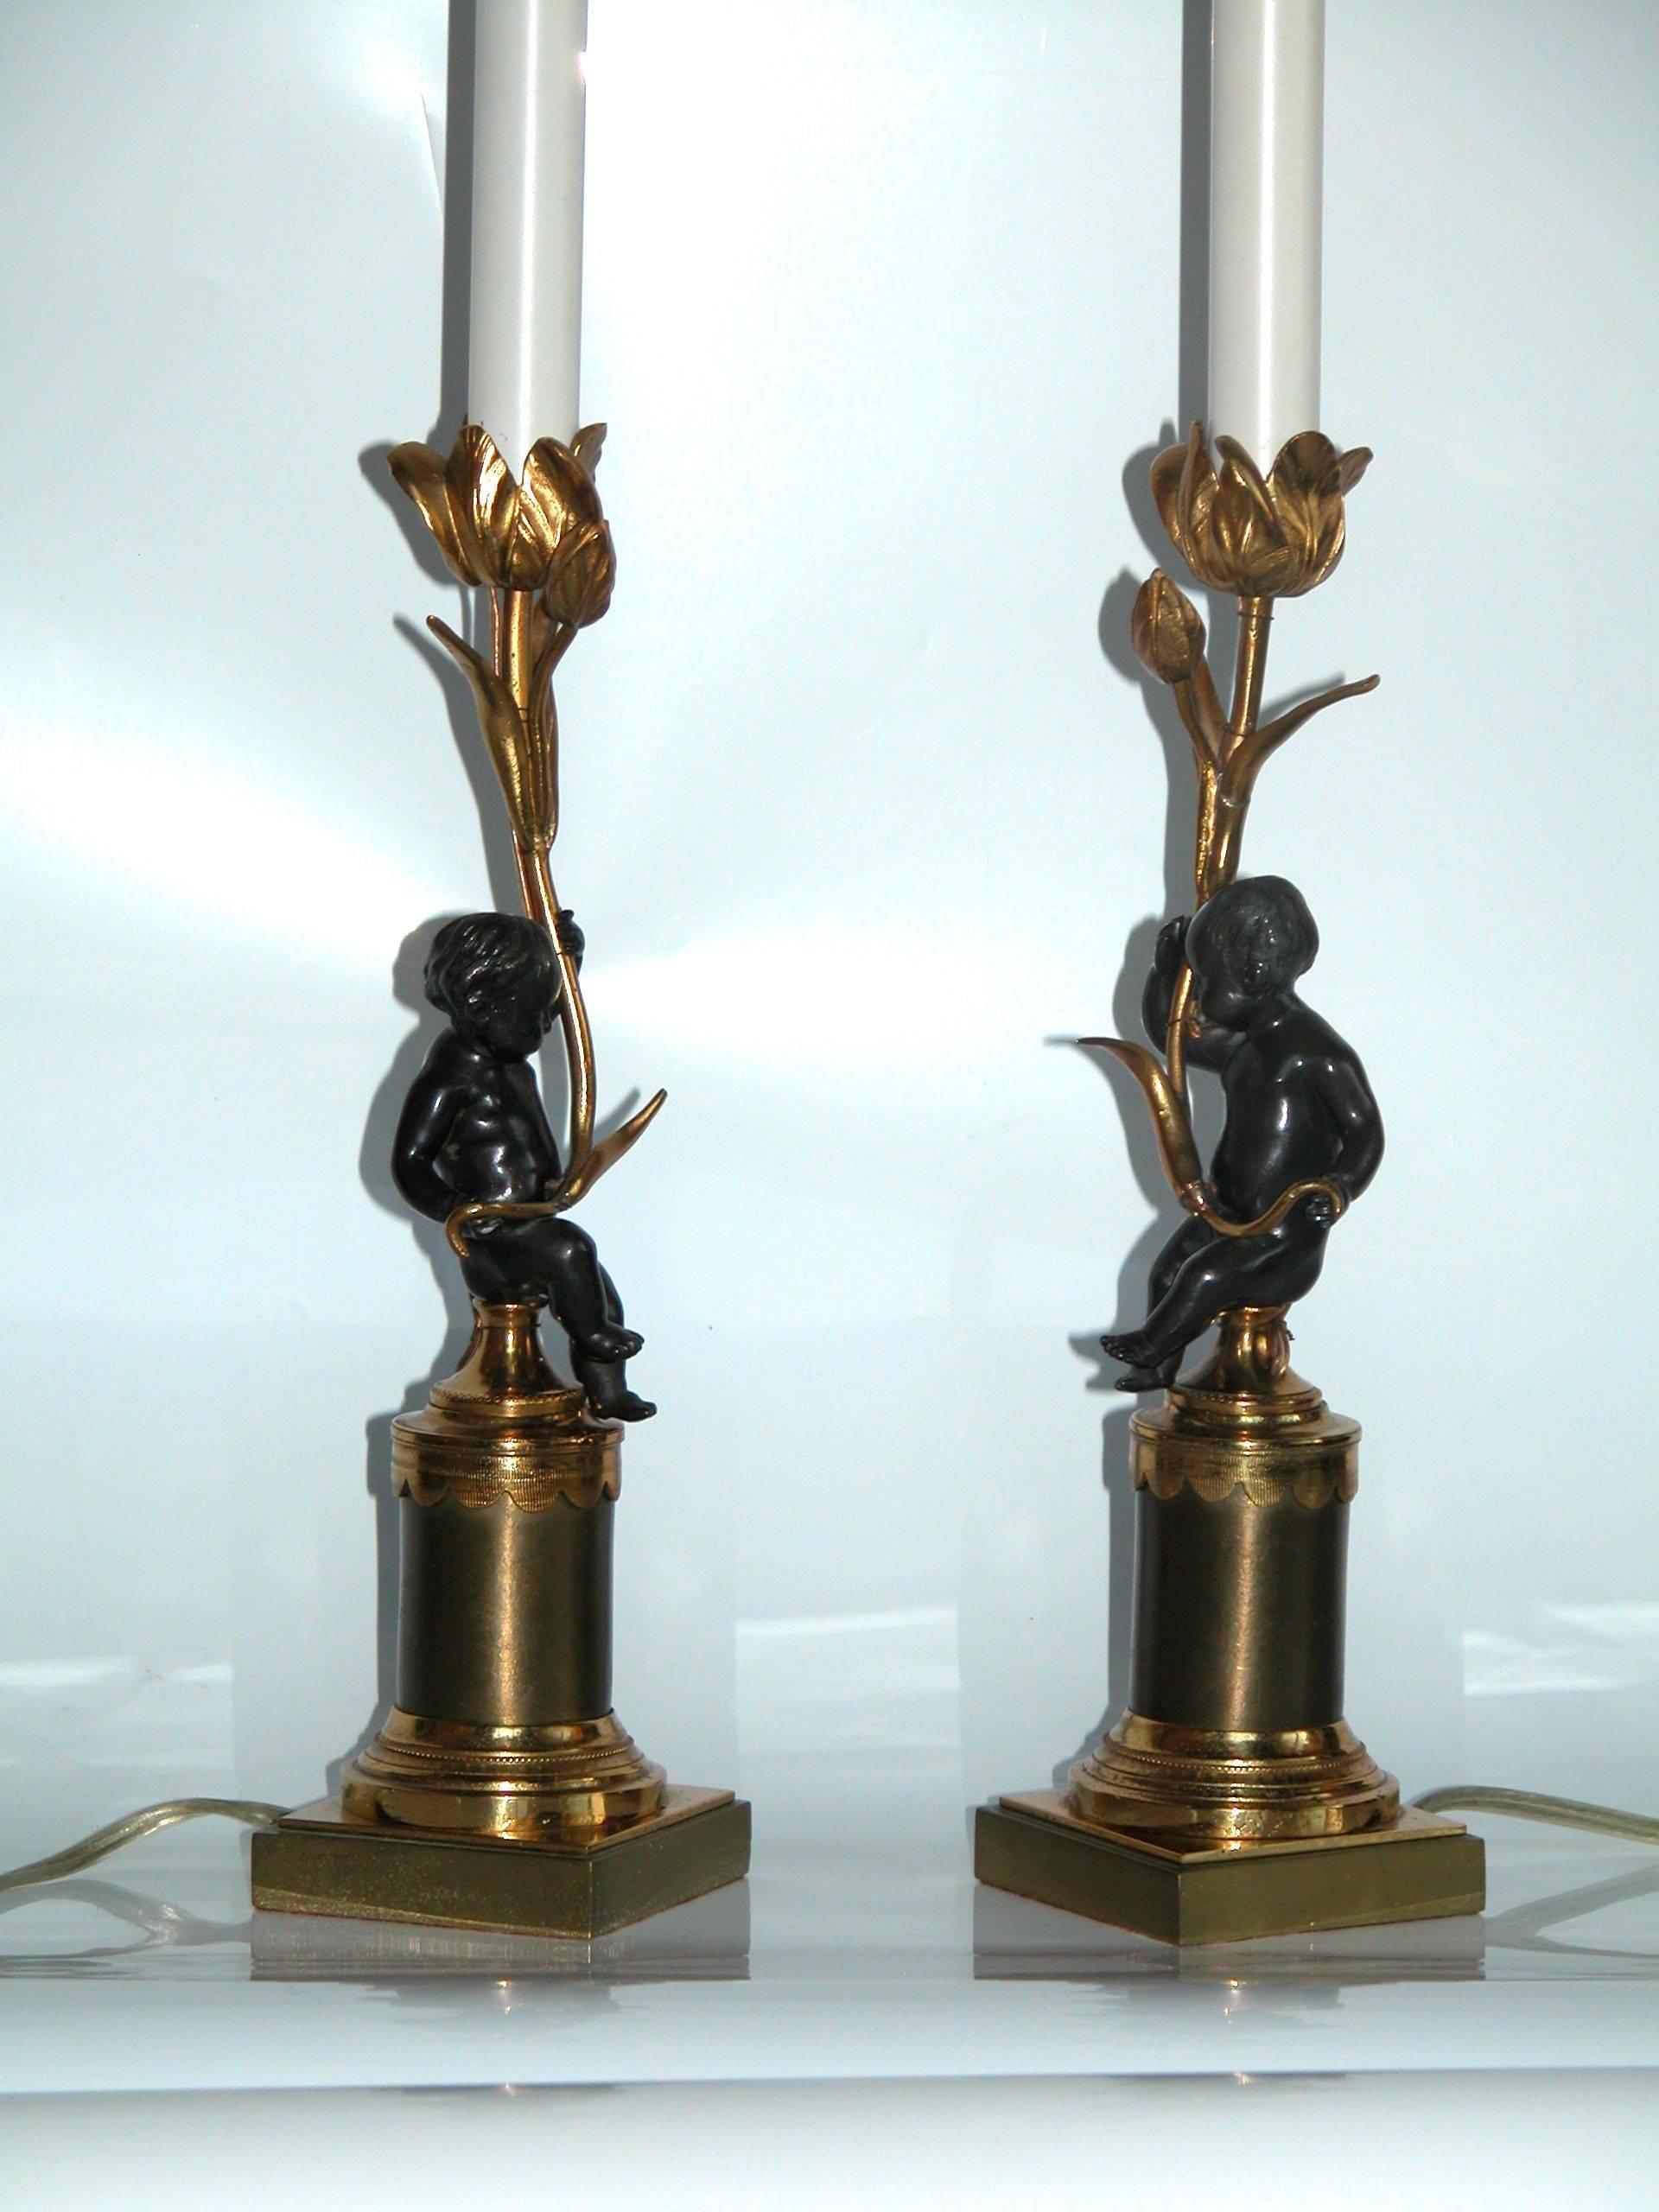 Pair of exquisite dressing table lamps in bright gilt finish with dark bronze finished cherubs. The dimension to the top of the gilt floral candle cup is 11 3/4